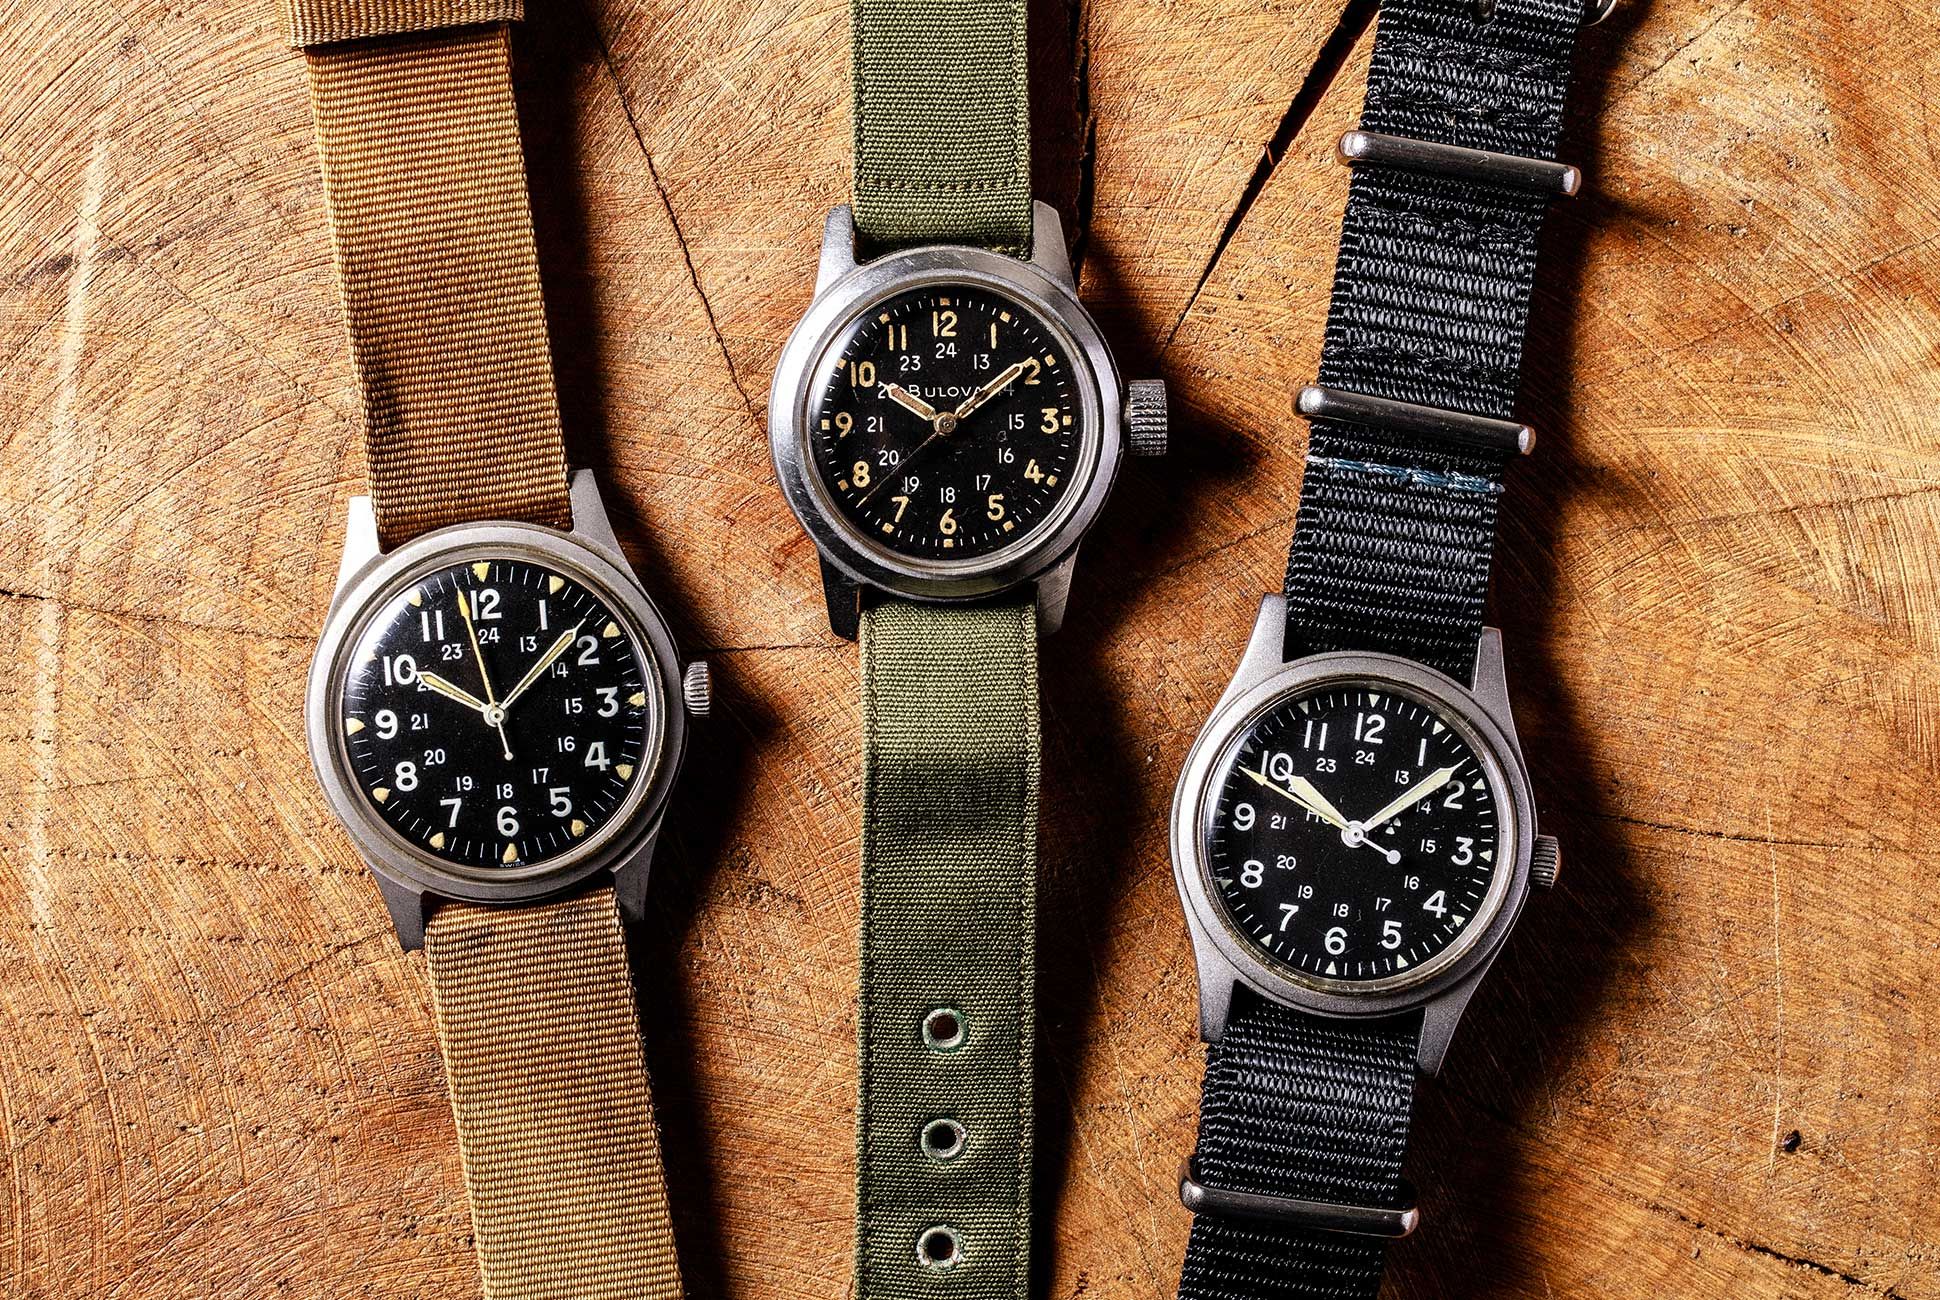 The Joys of a Cheap American Military Watch